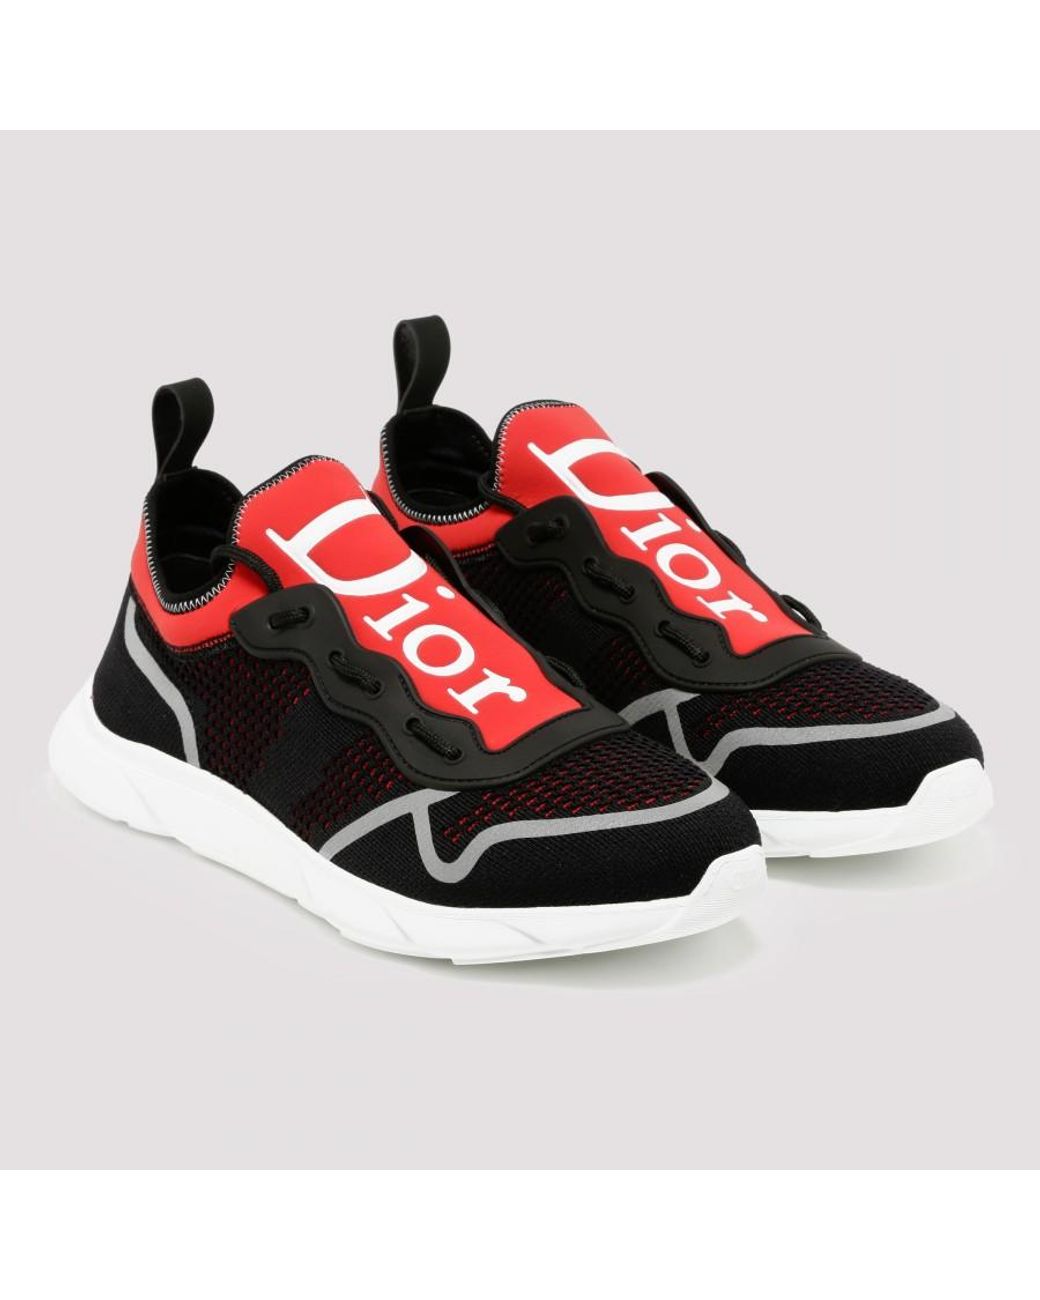 Dior Homme B21 Neo Red And Black Sneakers for Men | Lyst